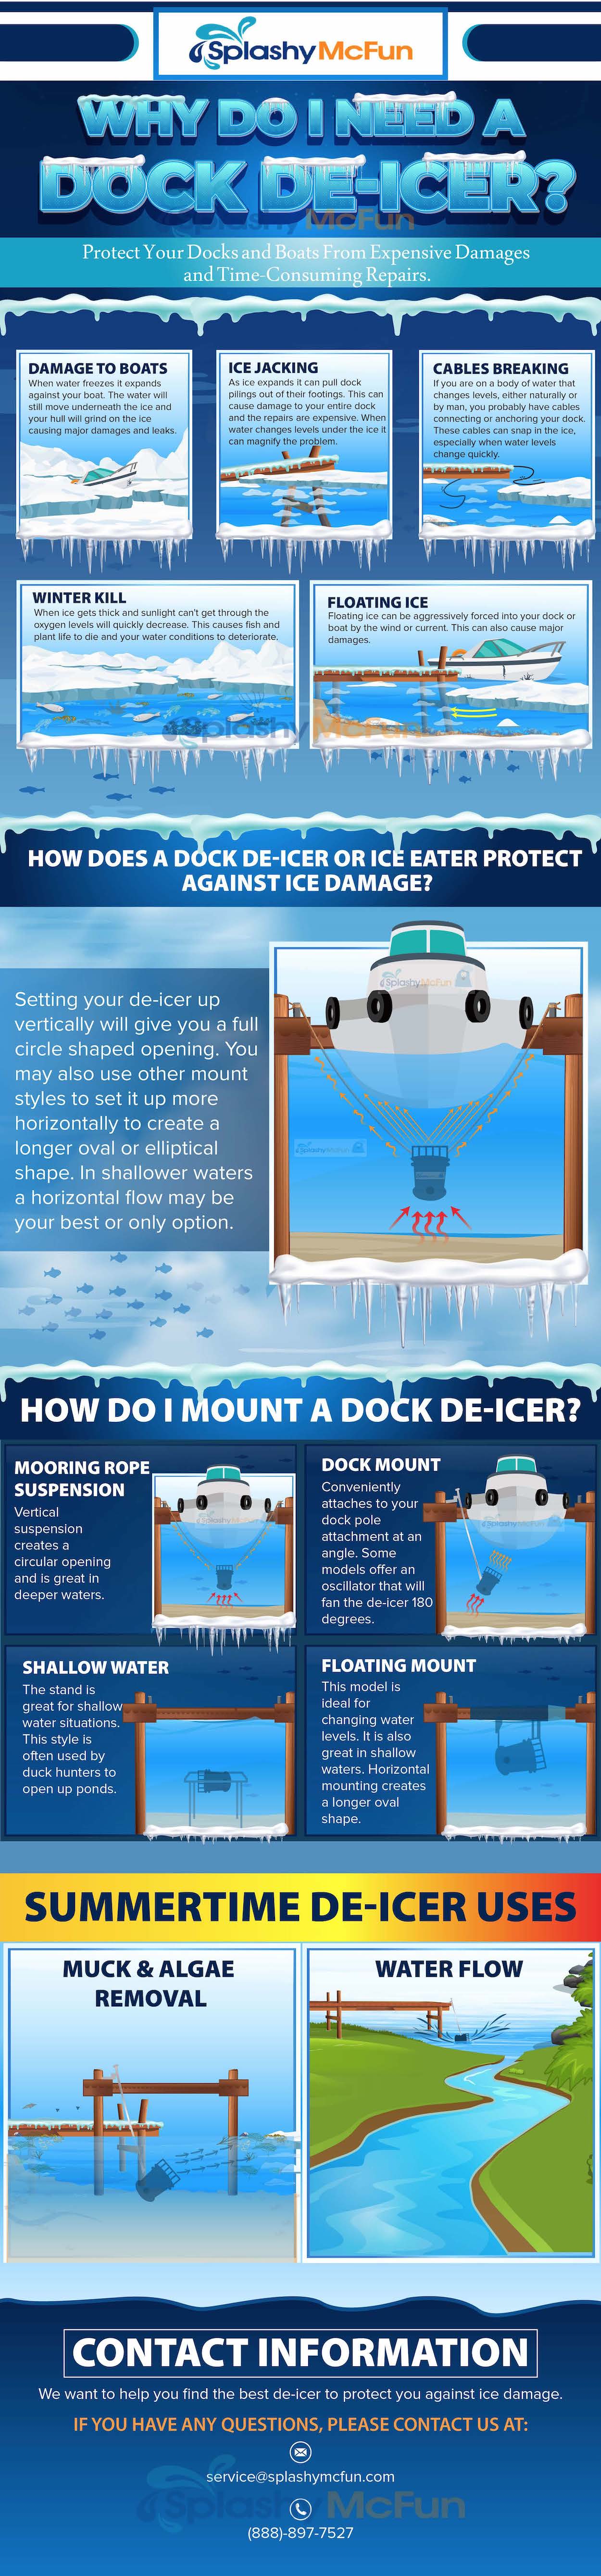 How an ice eater or dock deicer can protect your dock graphic